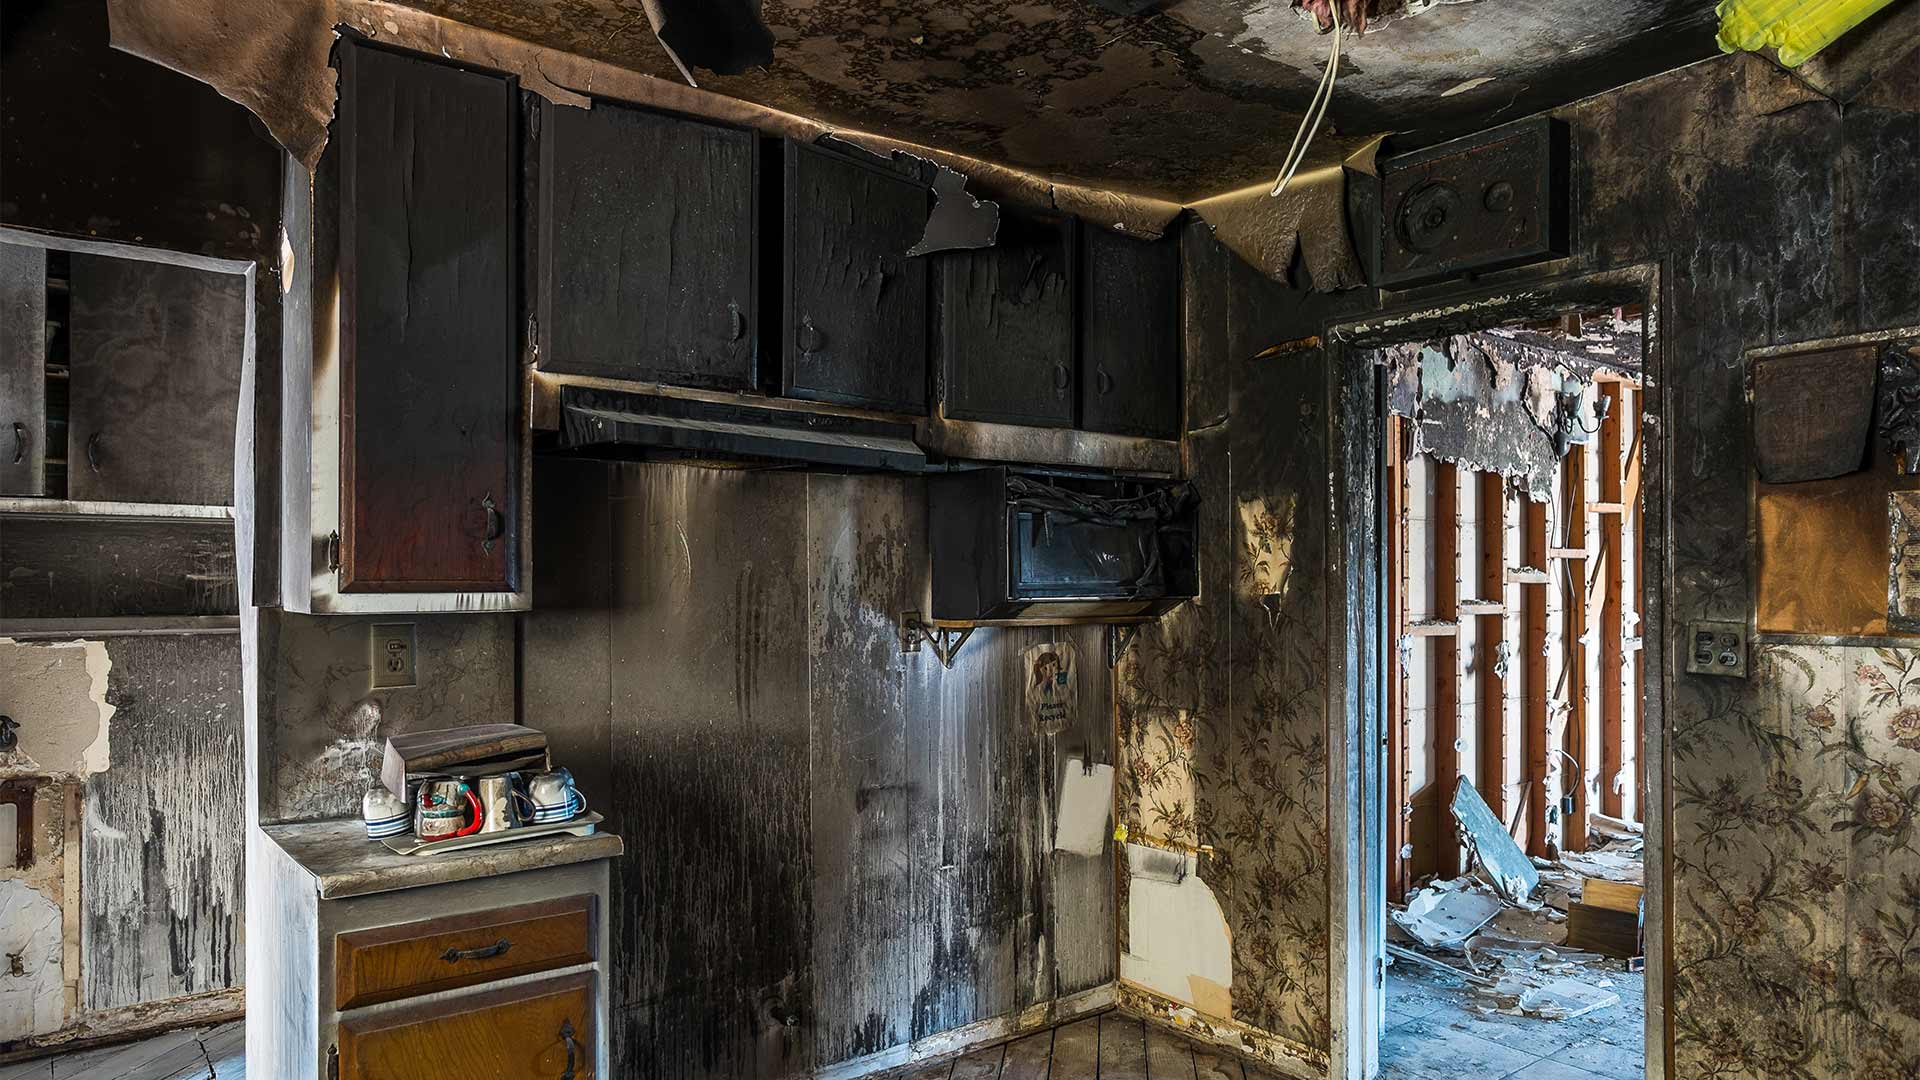 residential property interiors burned after fire desert hot springs ca